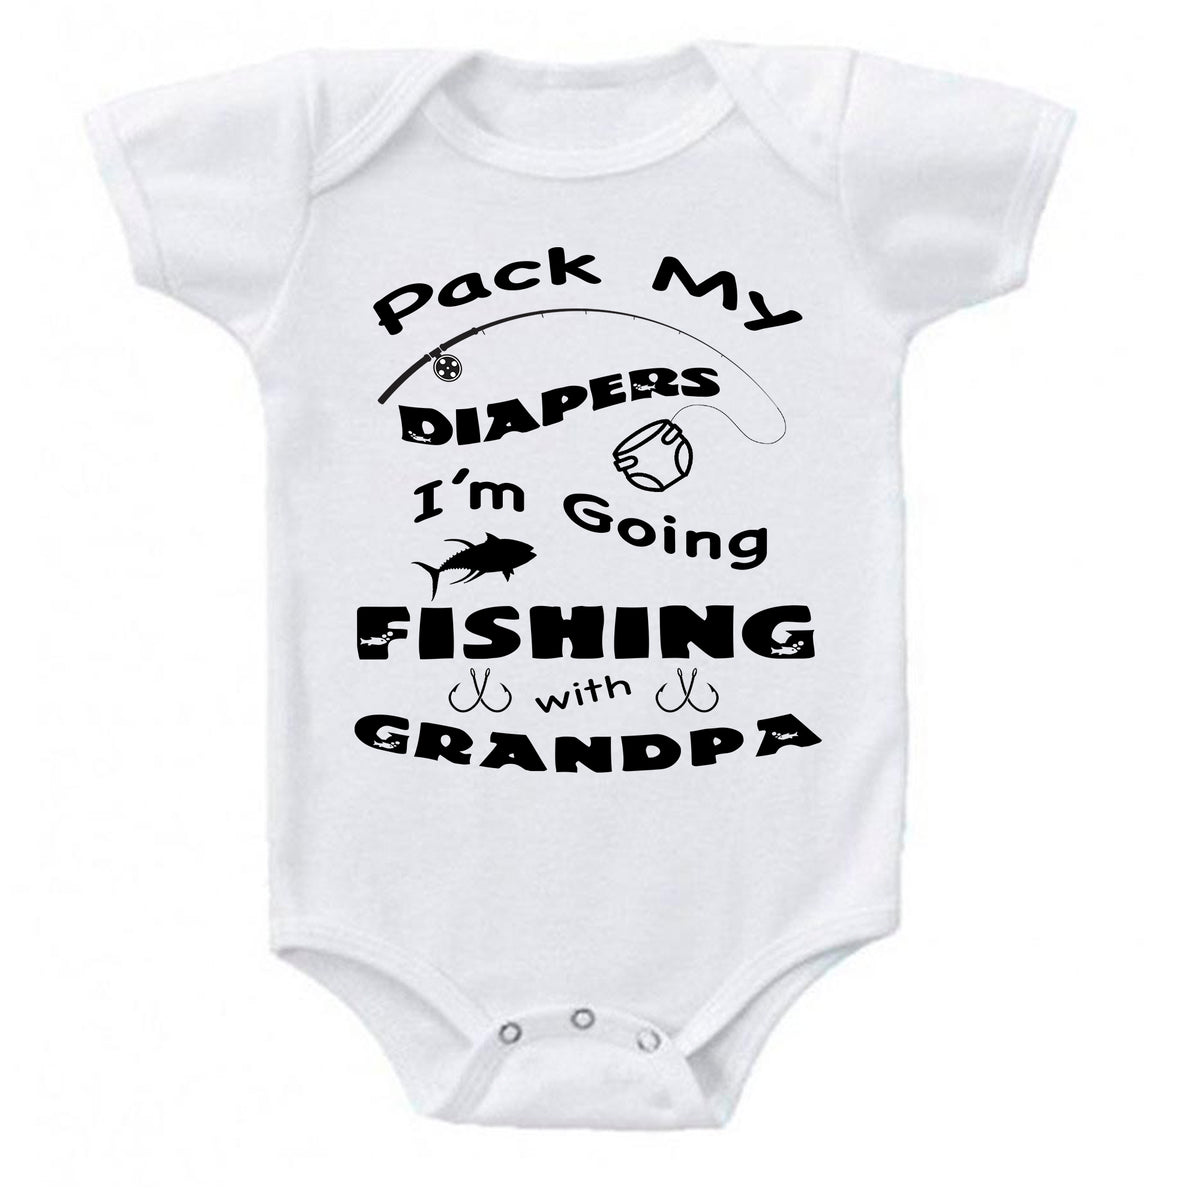 Reel Cool Uncle Men's T-Shirt Fish Graphic Tee Pack My Diapers I'm Going  Fishing With My Uncle Baby Bodysuit Kids Youth Toddler Shirt 